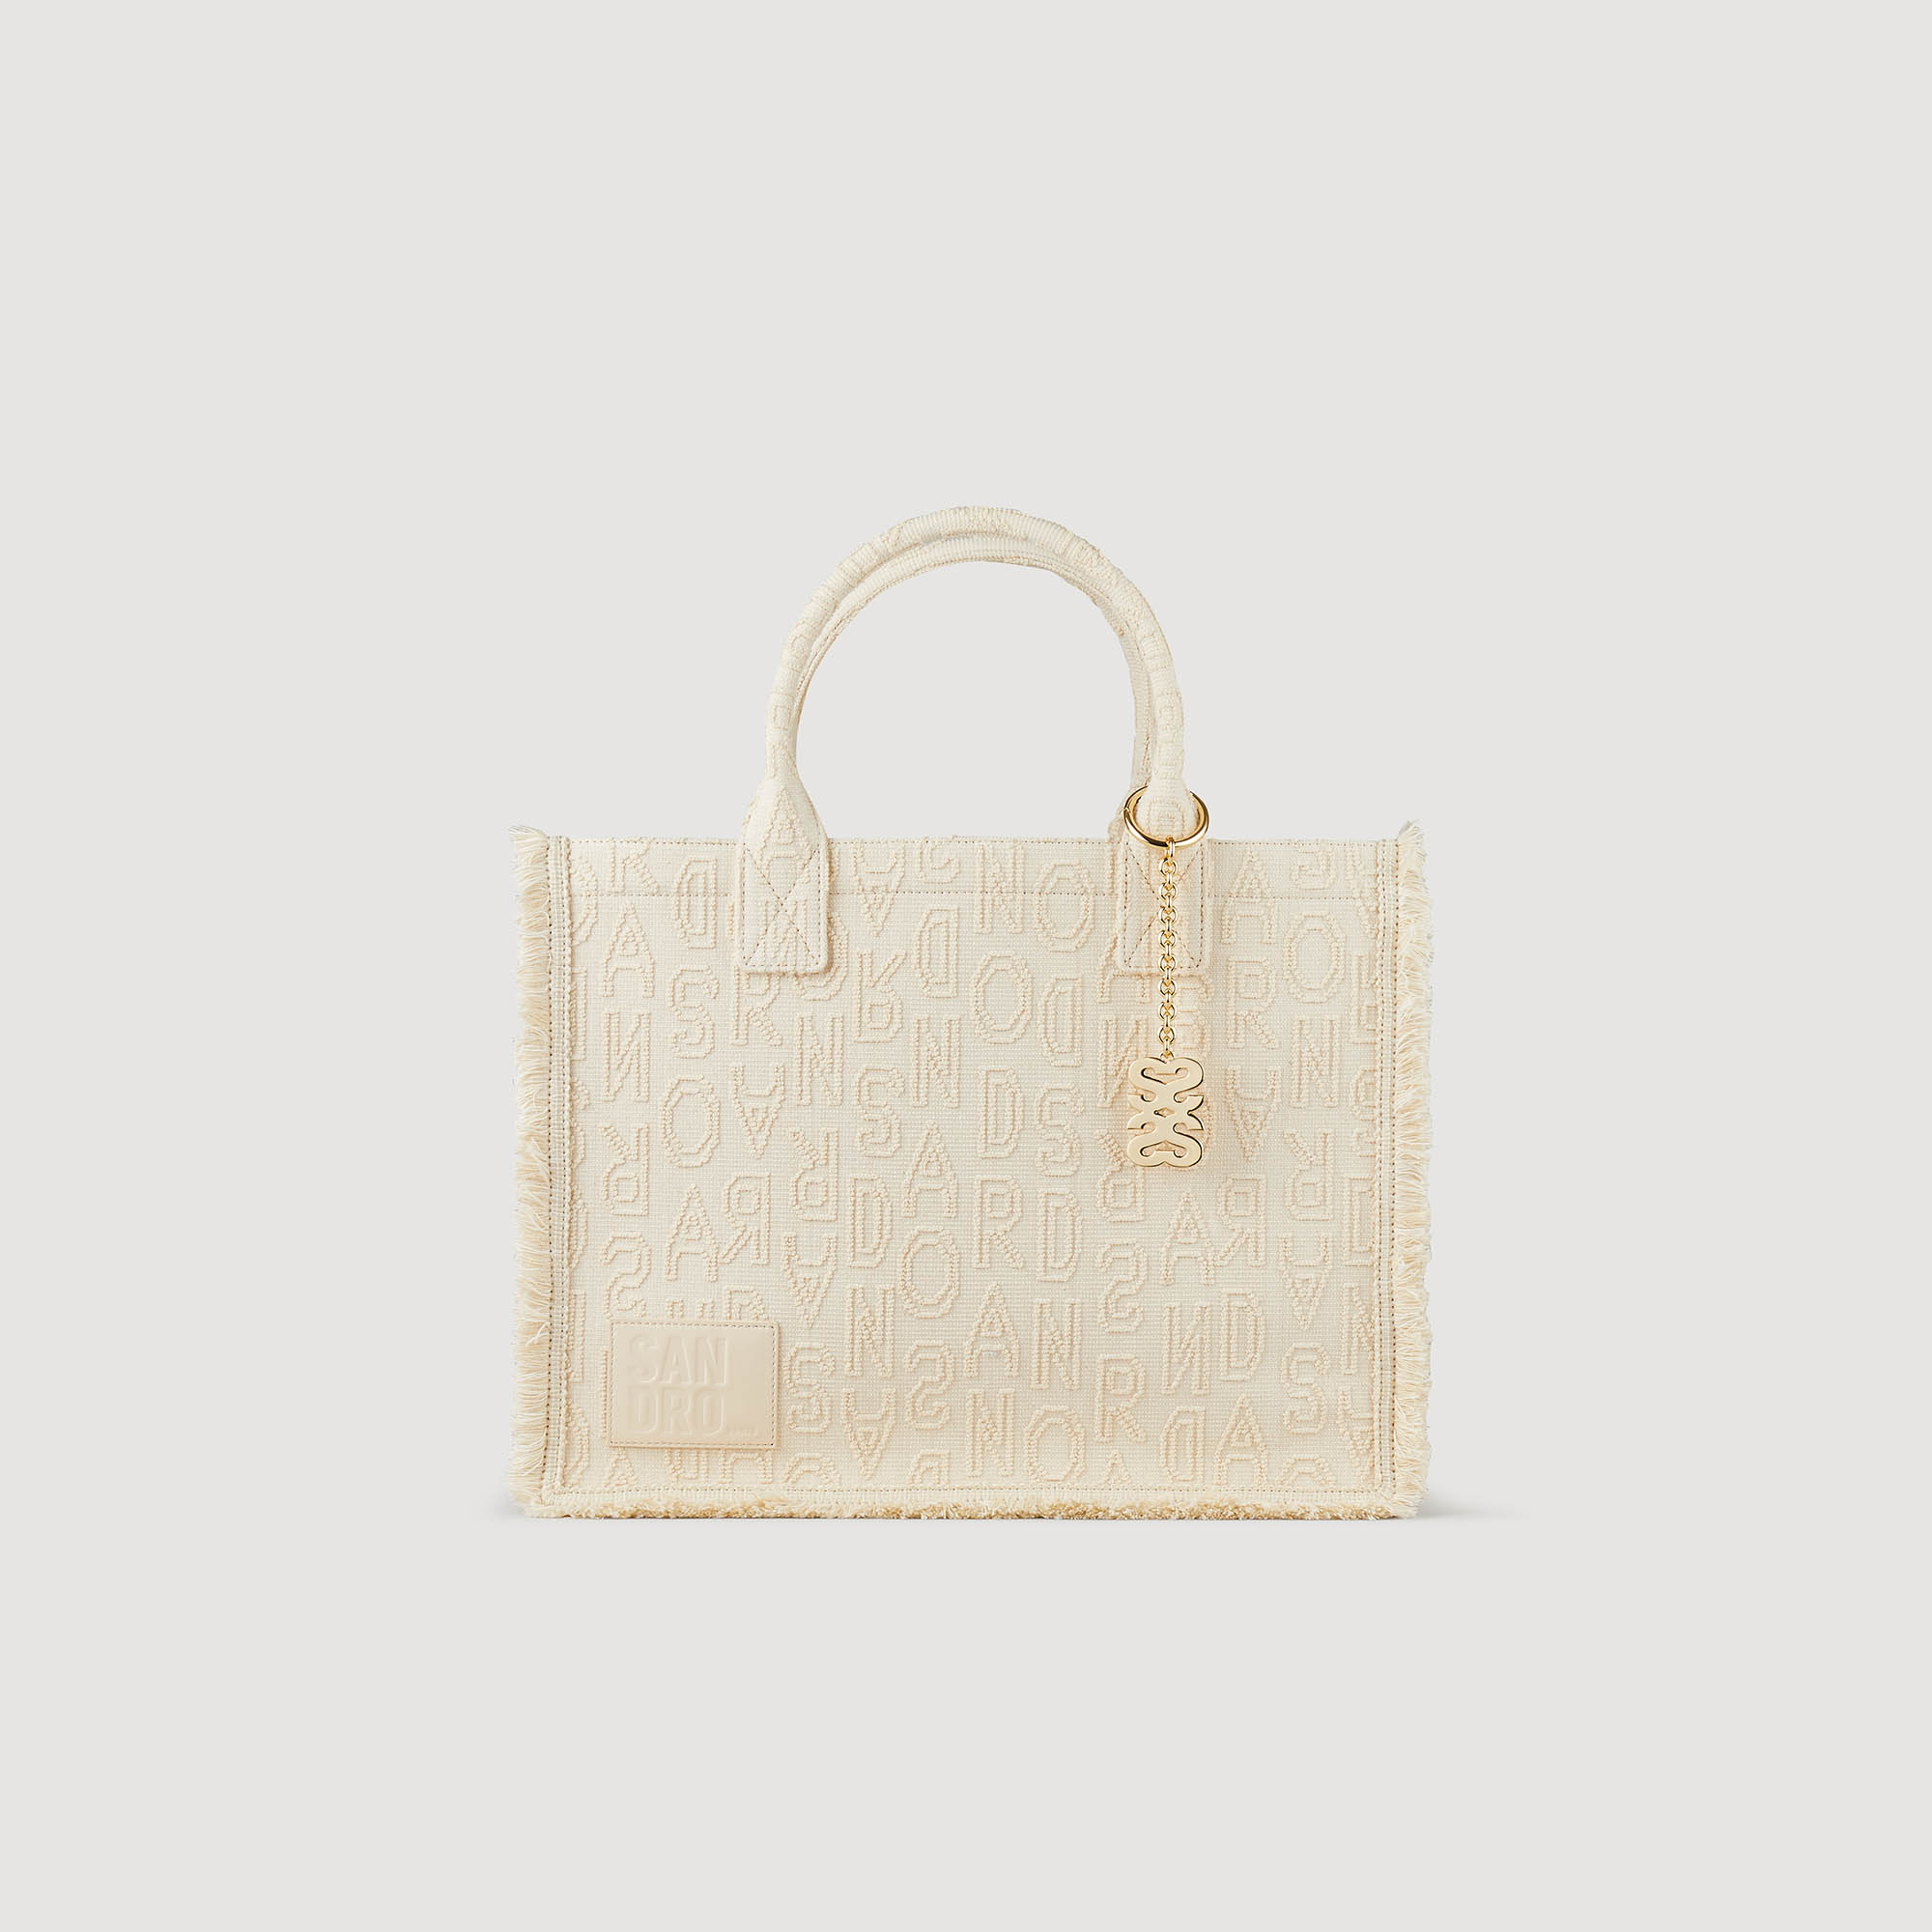 Sandro cotton Large jacquard cotton cloth tote bag embroidered with the letters Sandro and featuring handles, a magnetic fastening, a detachable jewellery chain and small fringes on the edges